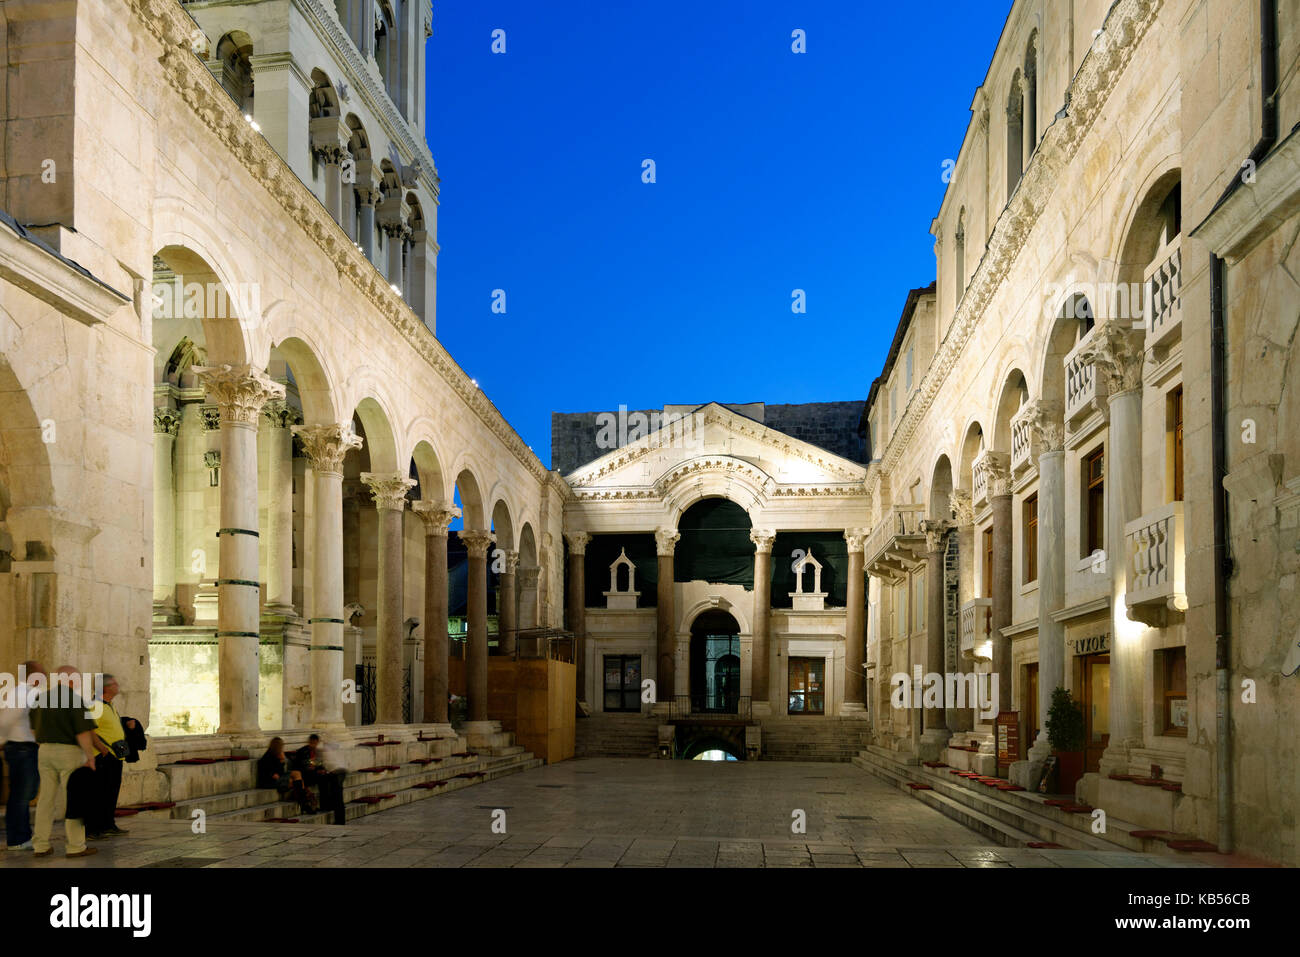 Croatia, Dalmatian coast, Split, old Roman city listed as World Heritage by UNESCO, Diocletian's palace, Peristyle and the Cafe Luxor Stock Photo